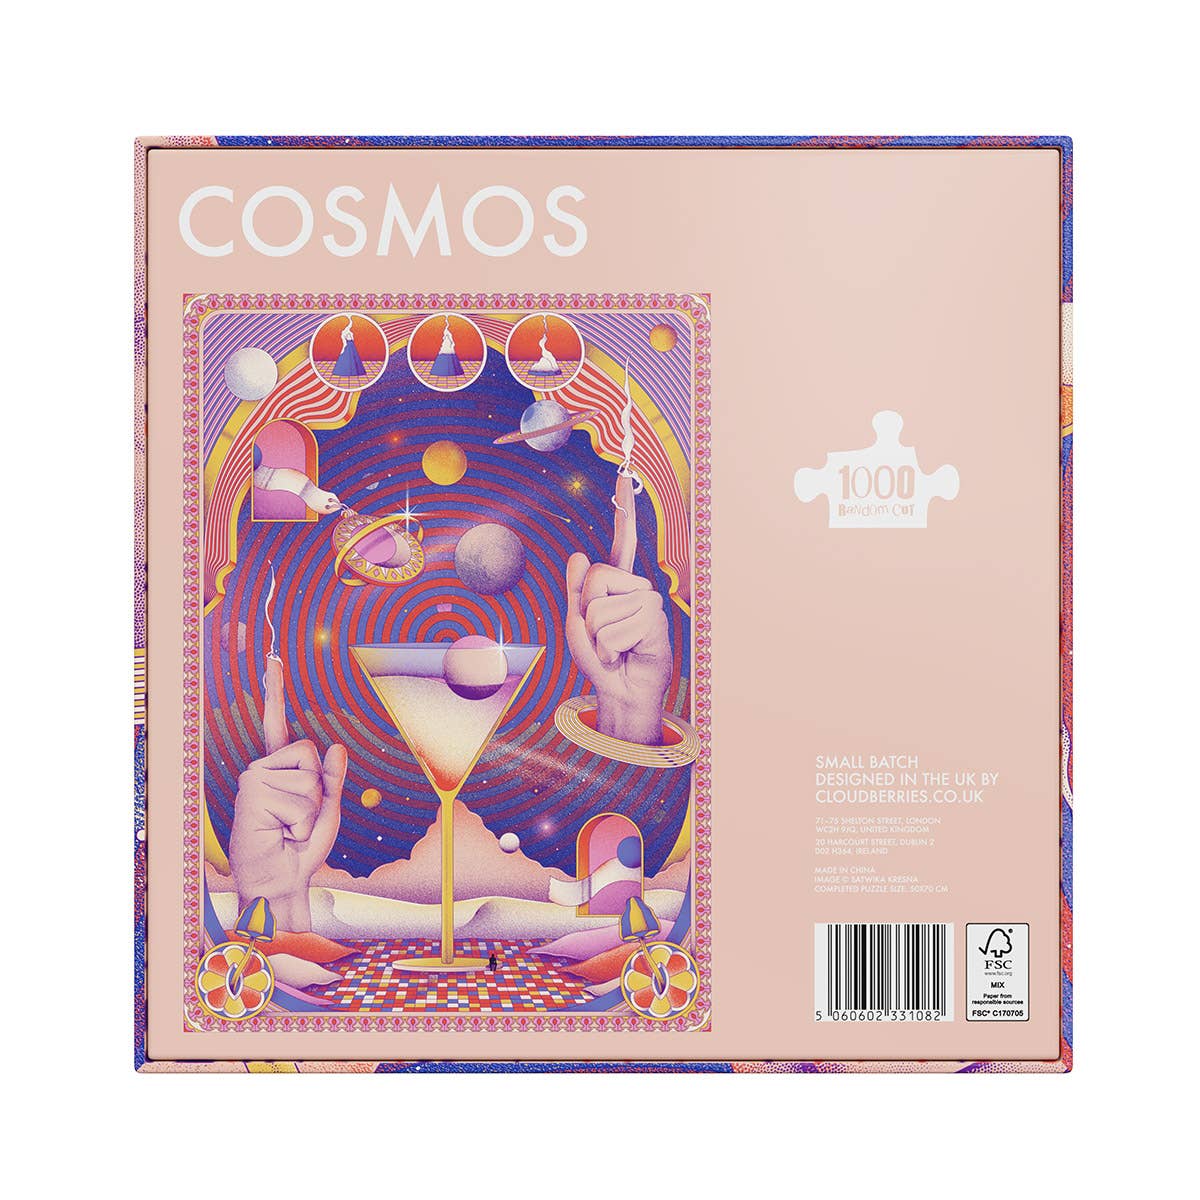 Cosmos 1000 Piece Jigsaw Puzzle by Cloudberries - Modern Puzzle